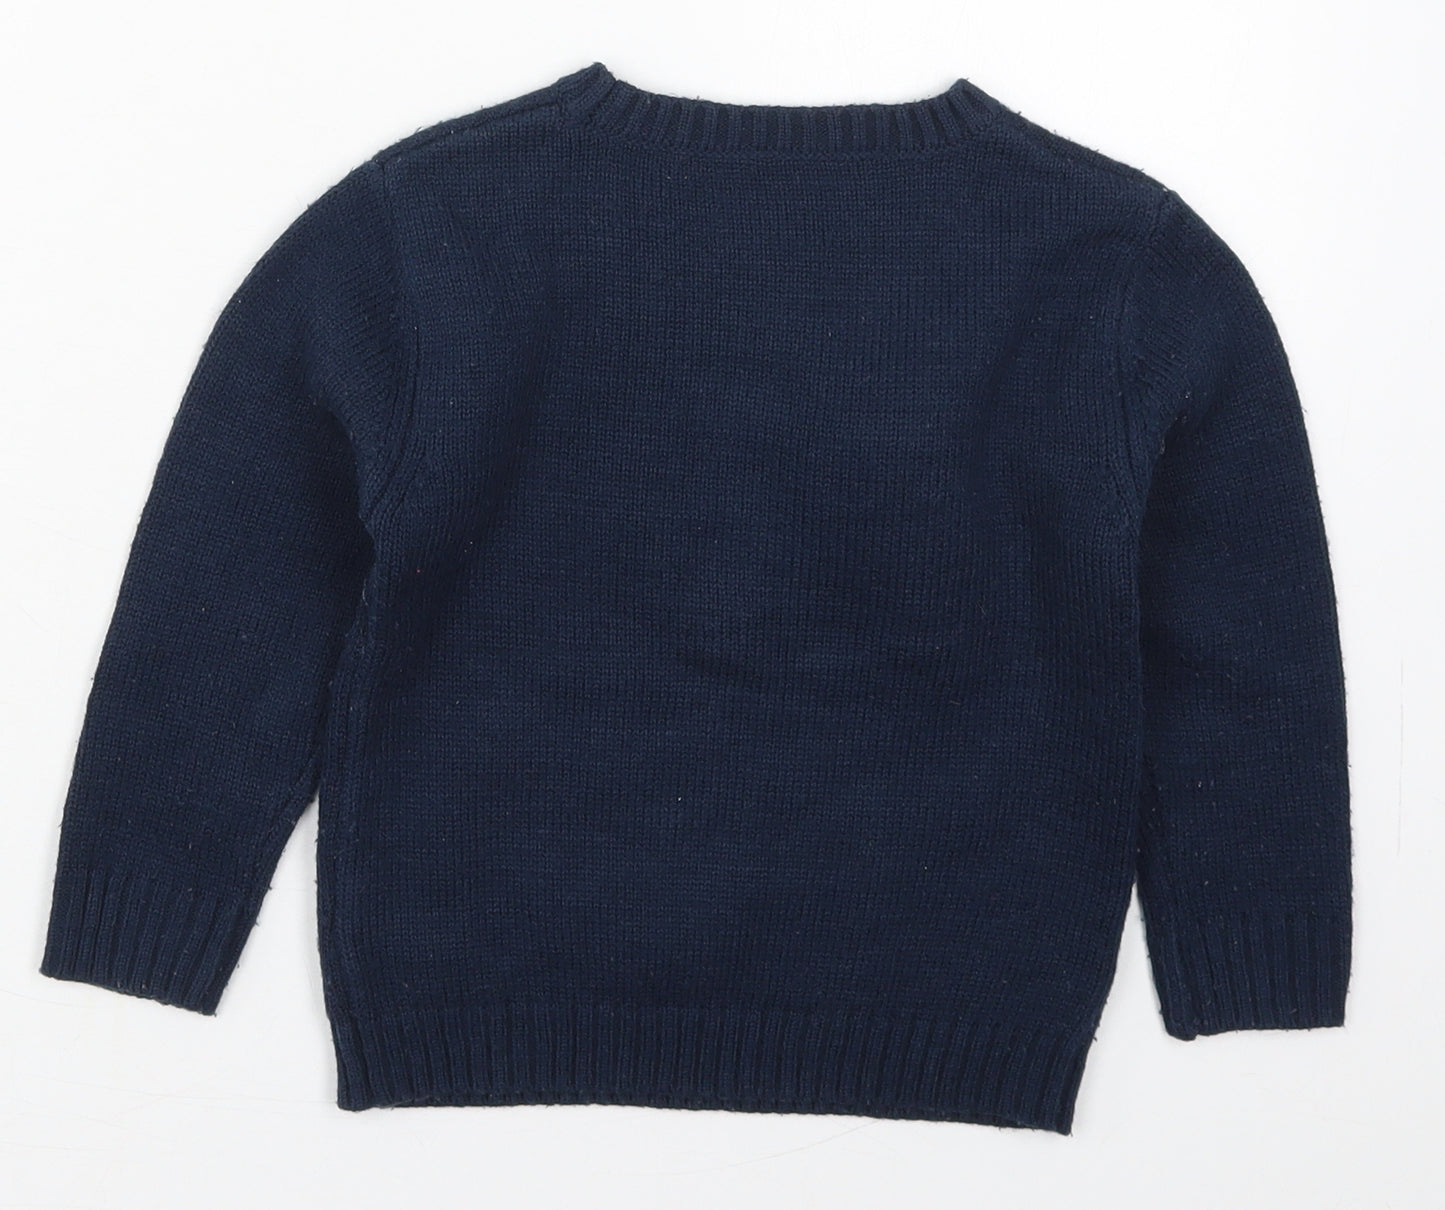 Dunnes Boys Blue Round Neck  Acrylic Pullover Jumper Size 4 Years  Pullover - Santa